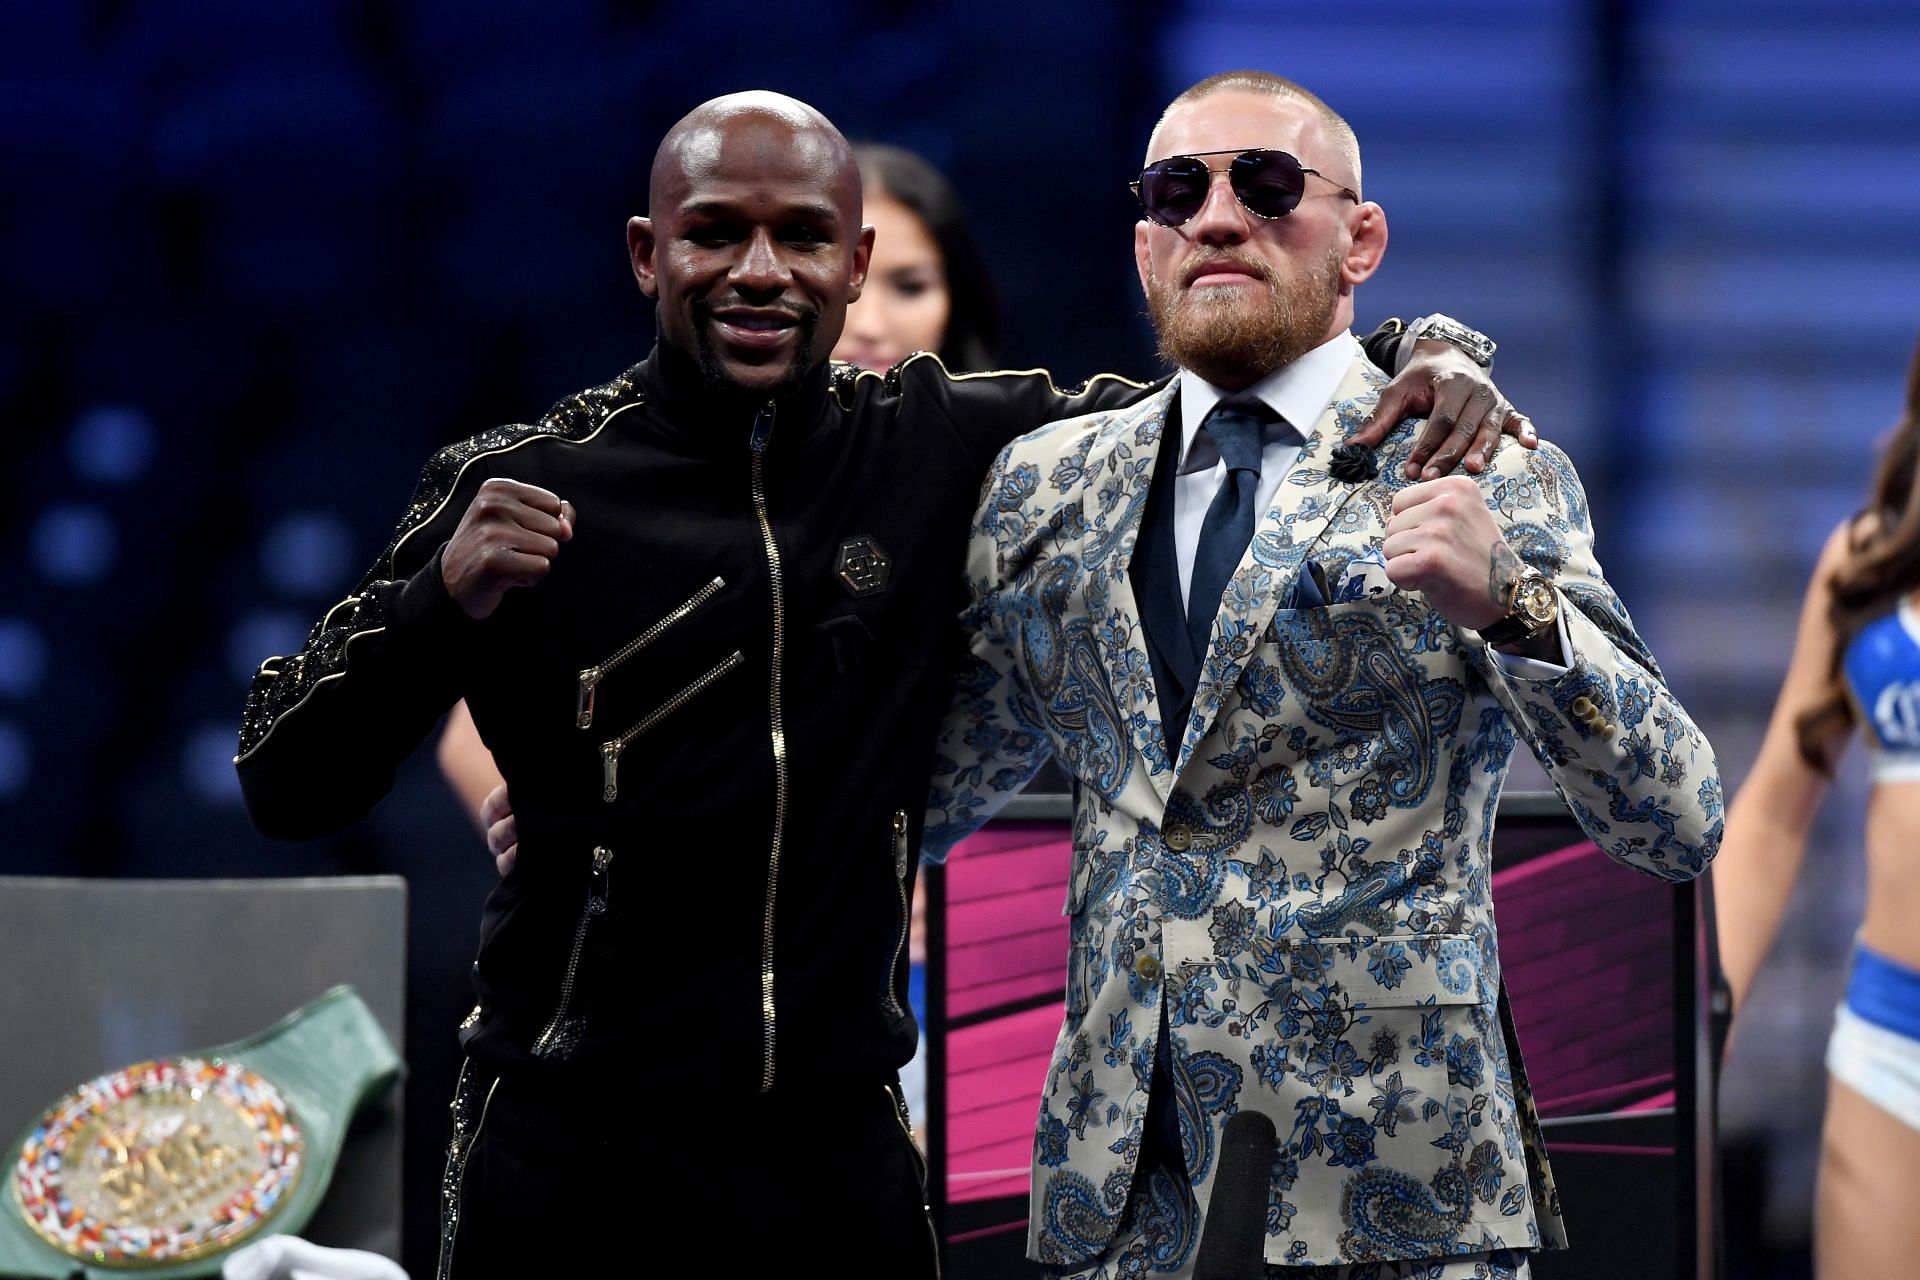 Mayweather vs. McGregor is believed to have sold over 5 million PPVs